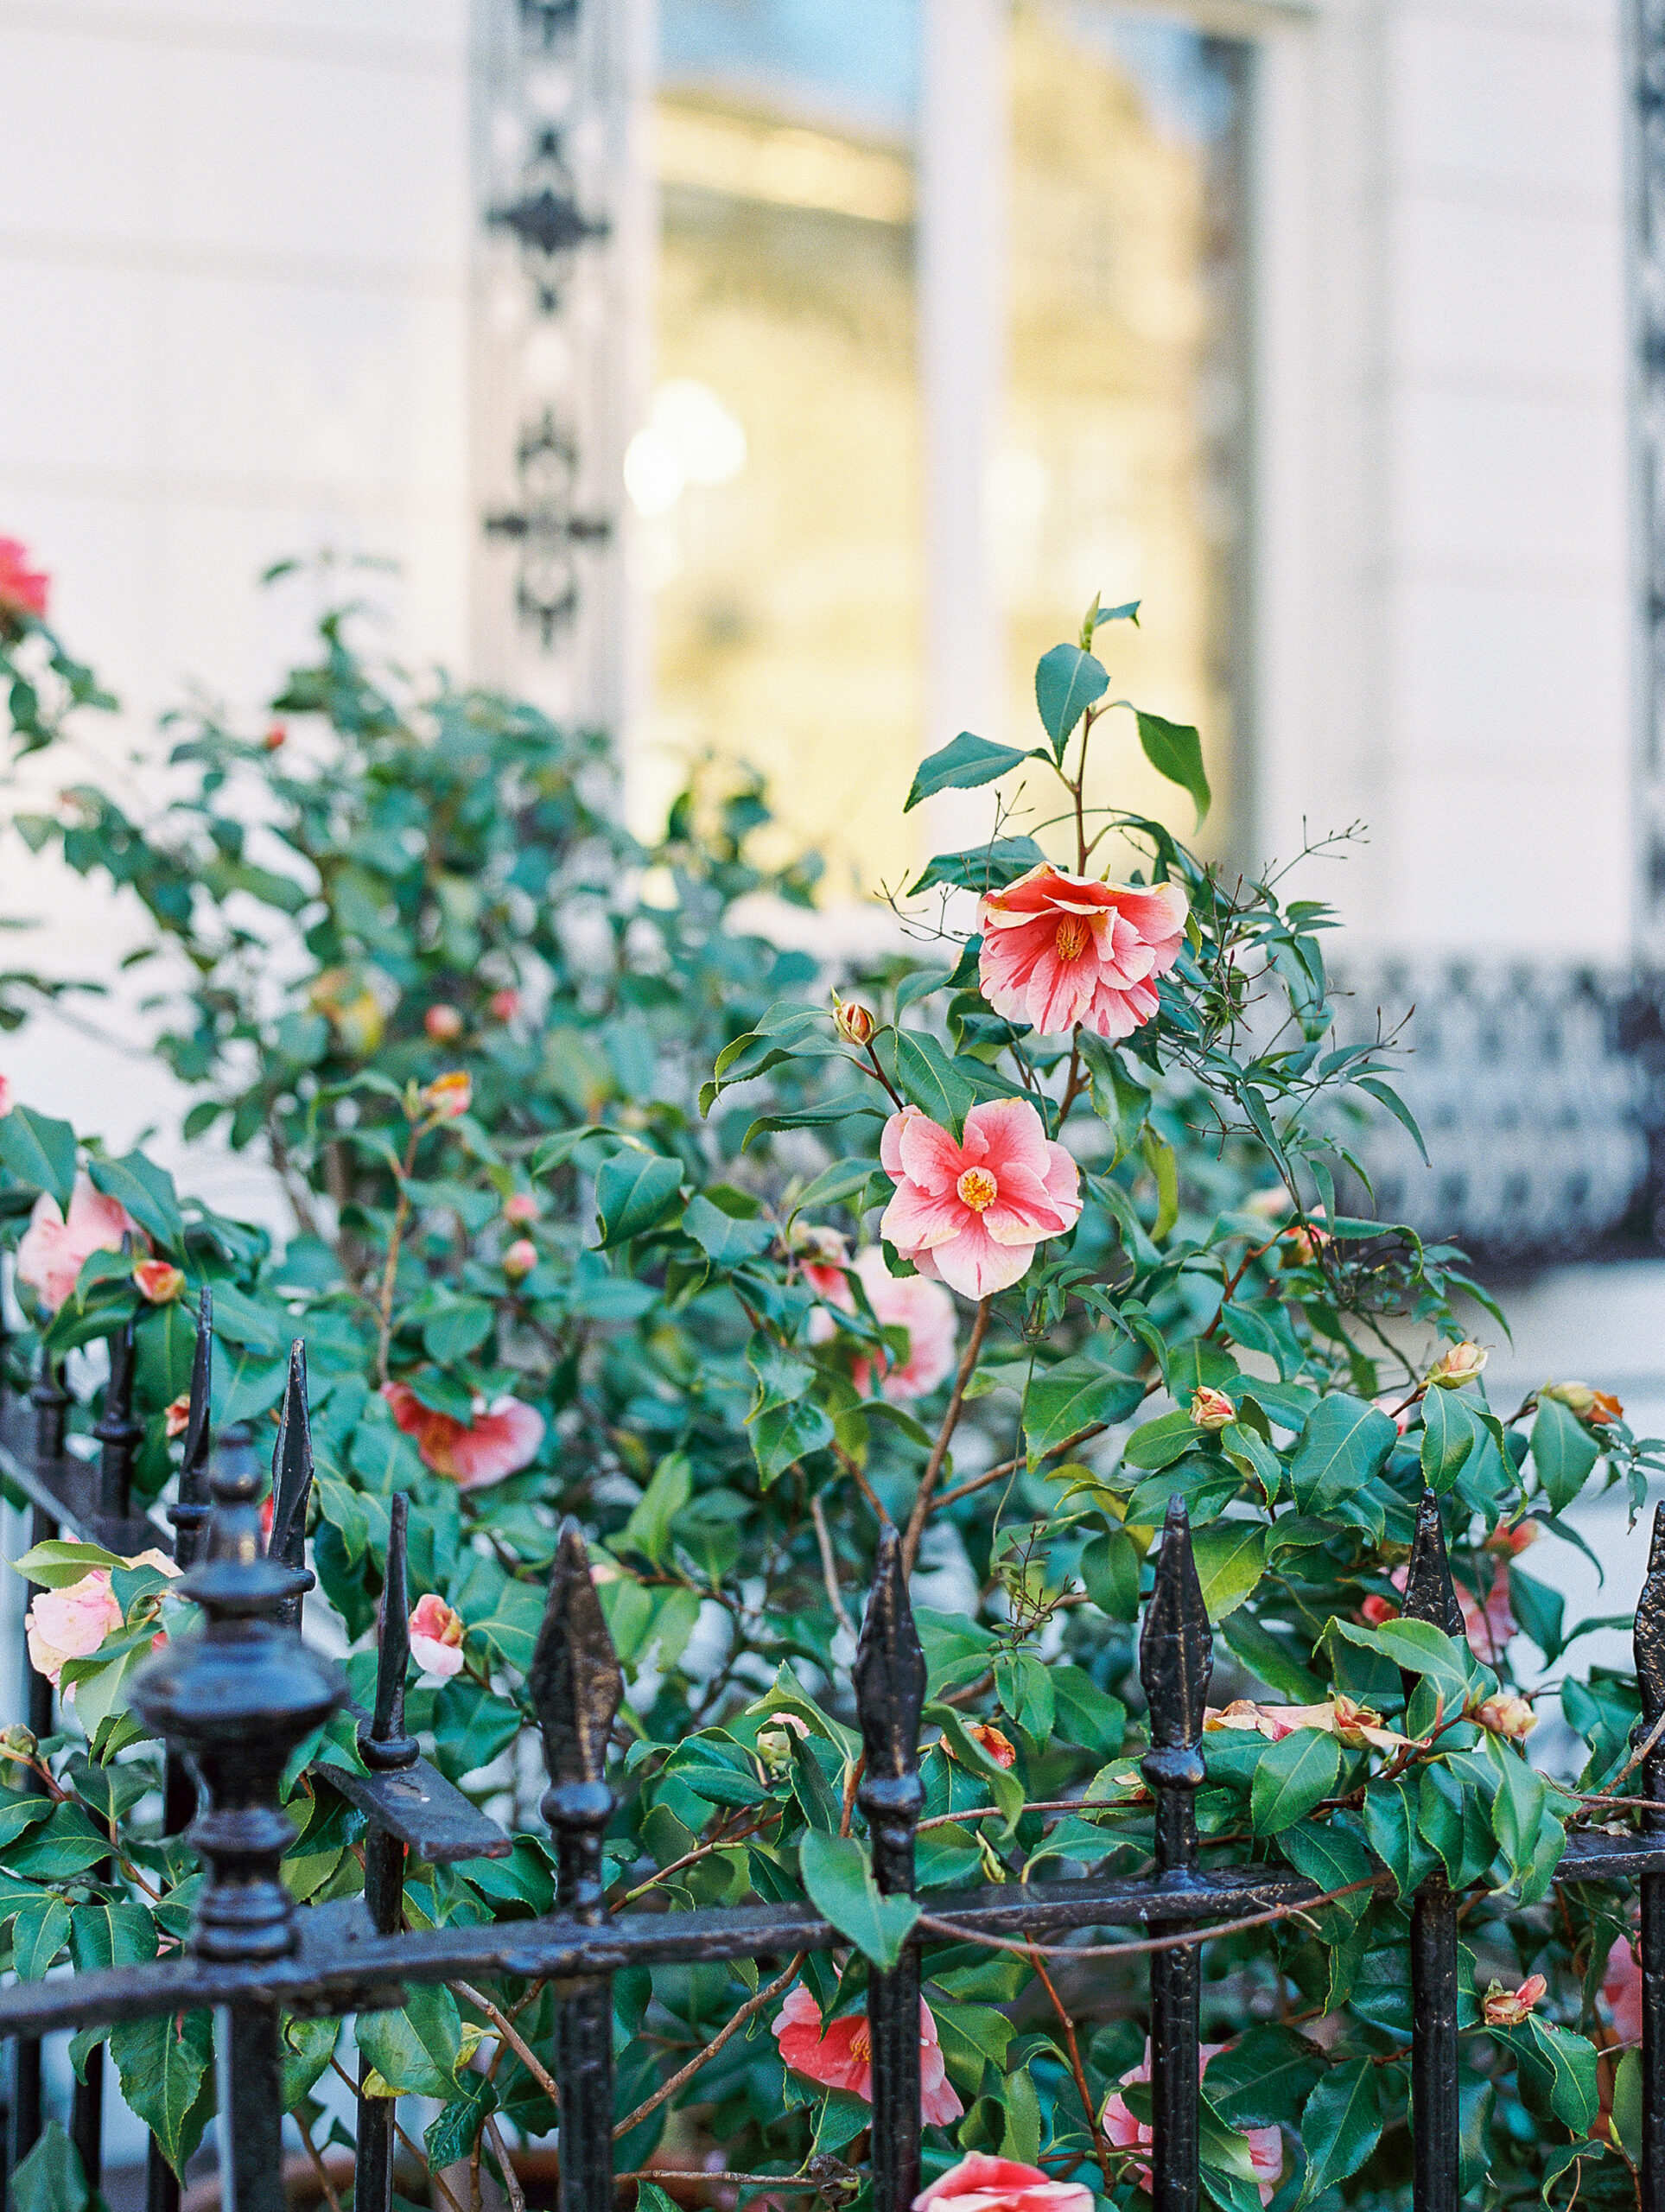 Spring in London Travel Blog by Destination Wedding Photographer Katie Trauffer - flowers growing on iron gate in London